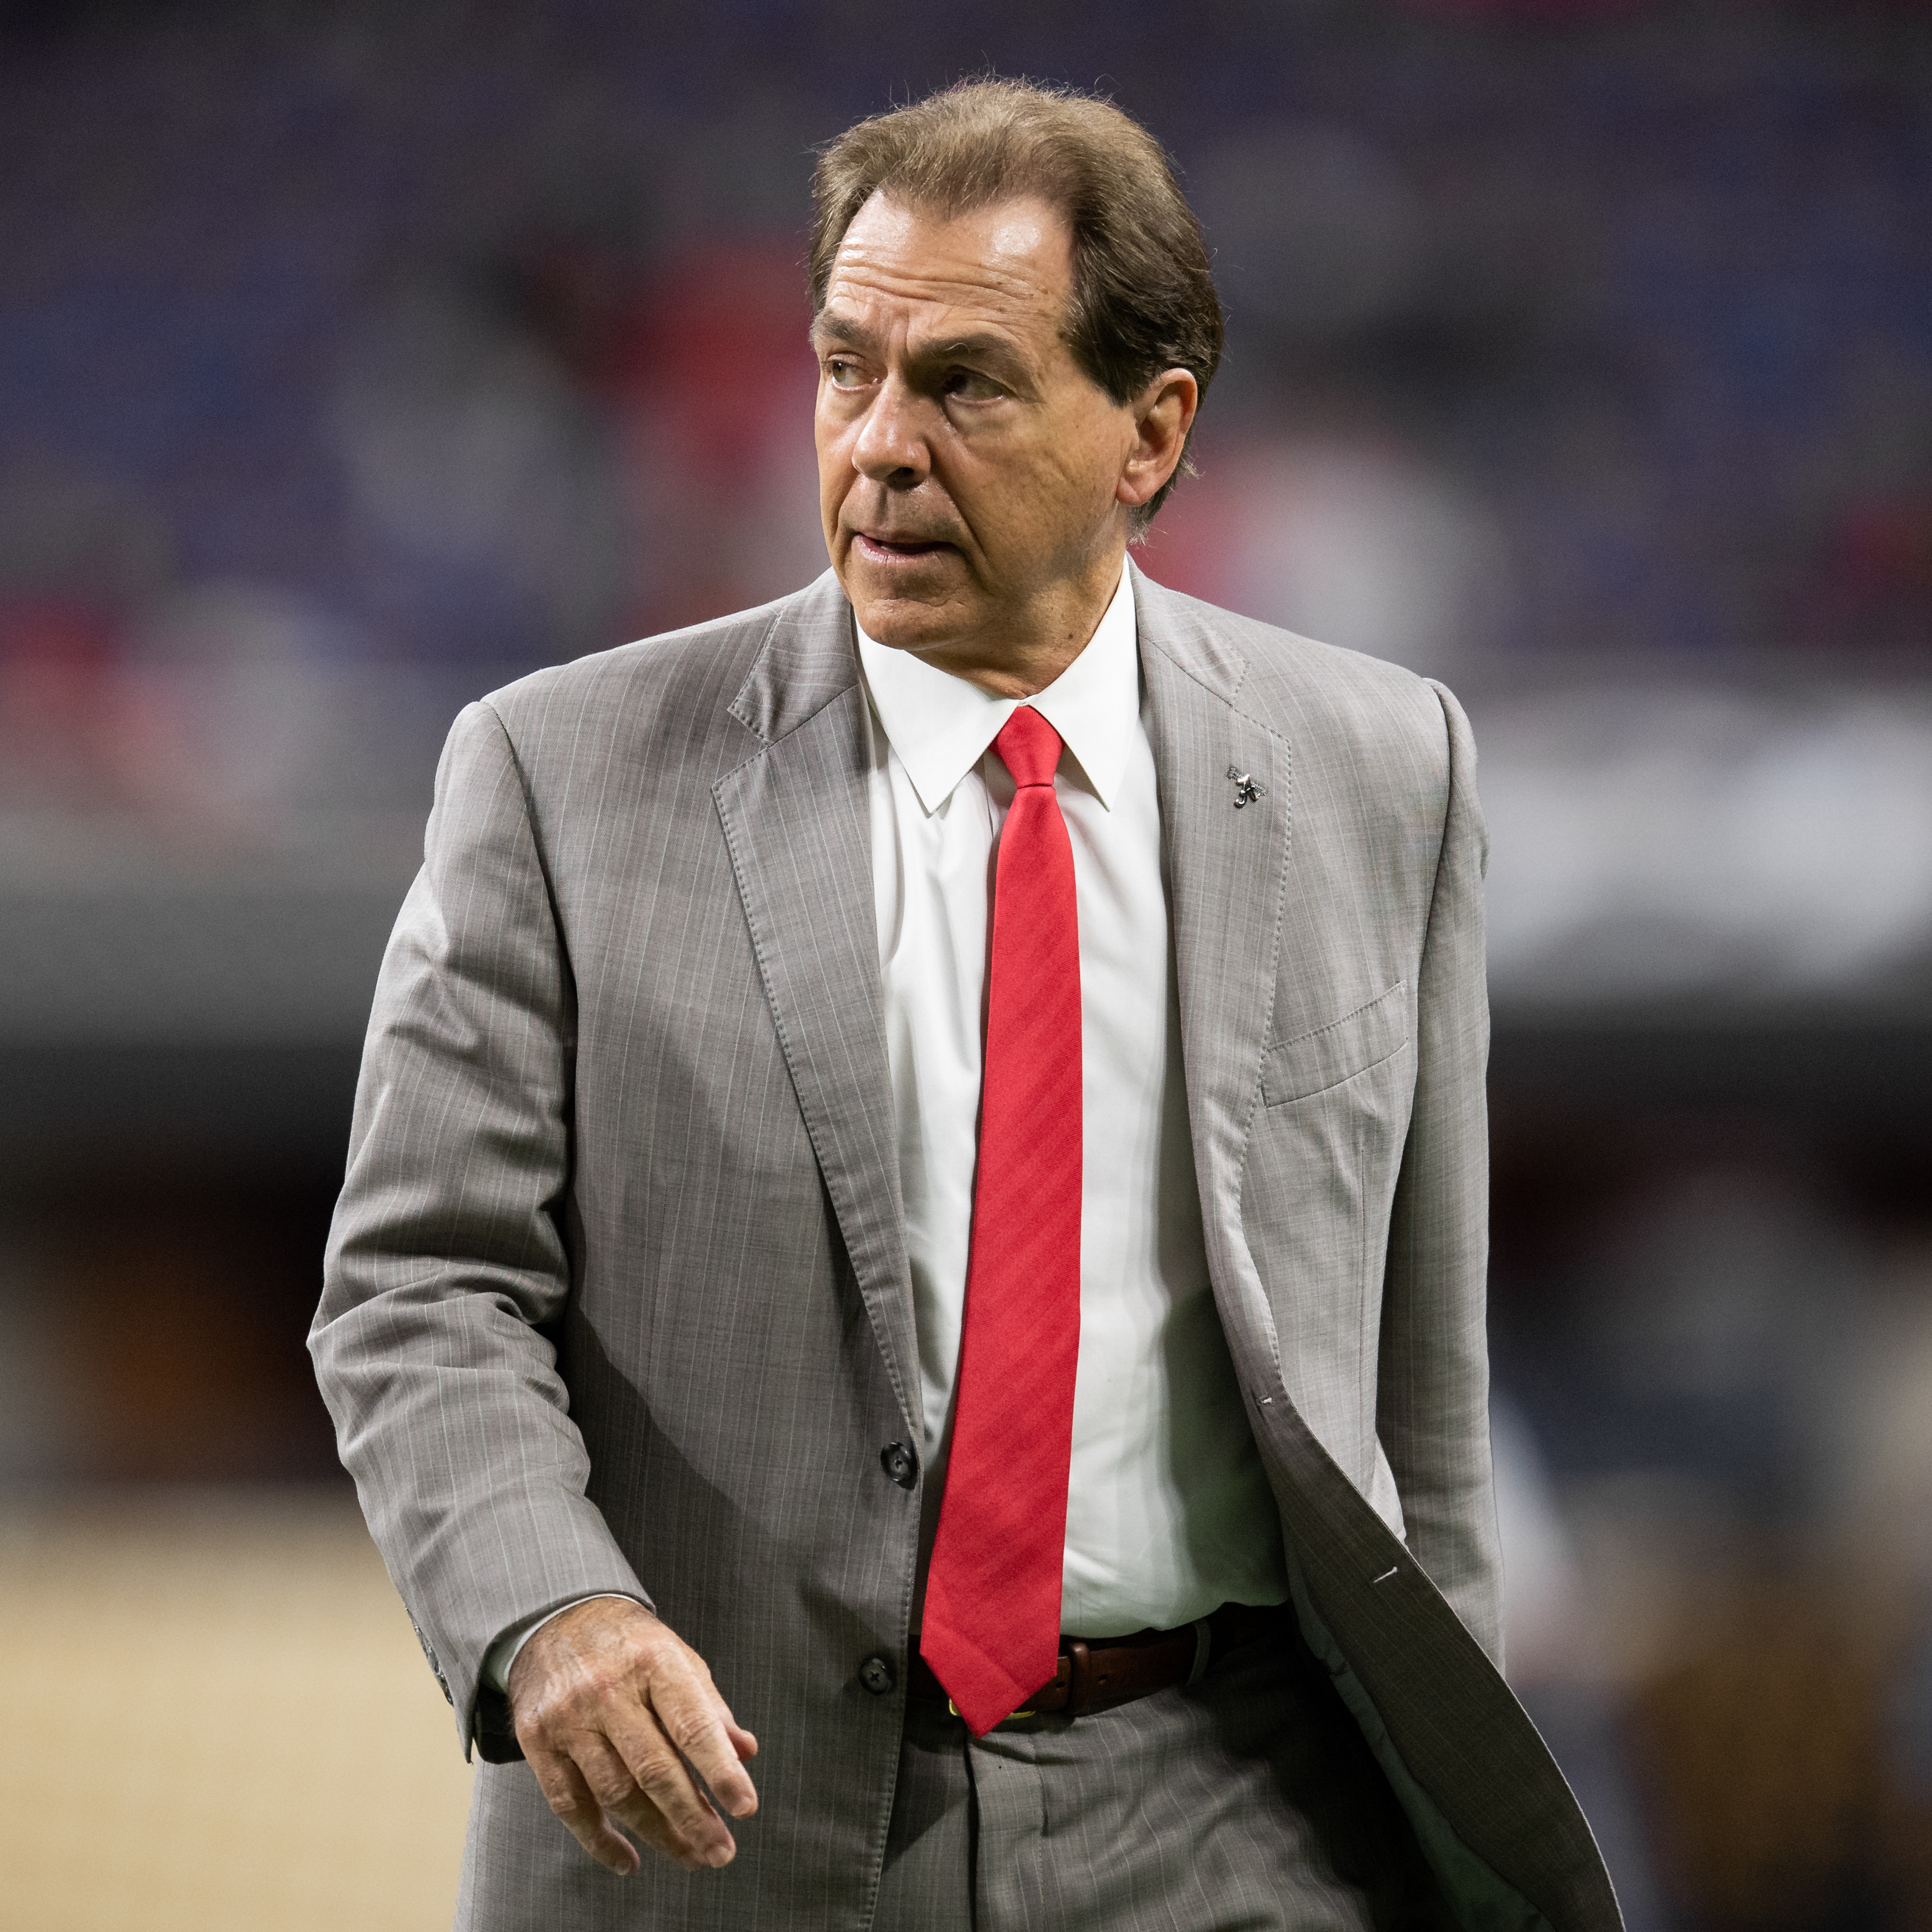 Nick Saban Says It Wasn’t His ‘Intention’ to Criticize Jimbo Fisher or Deion Sanders